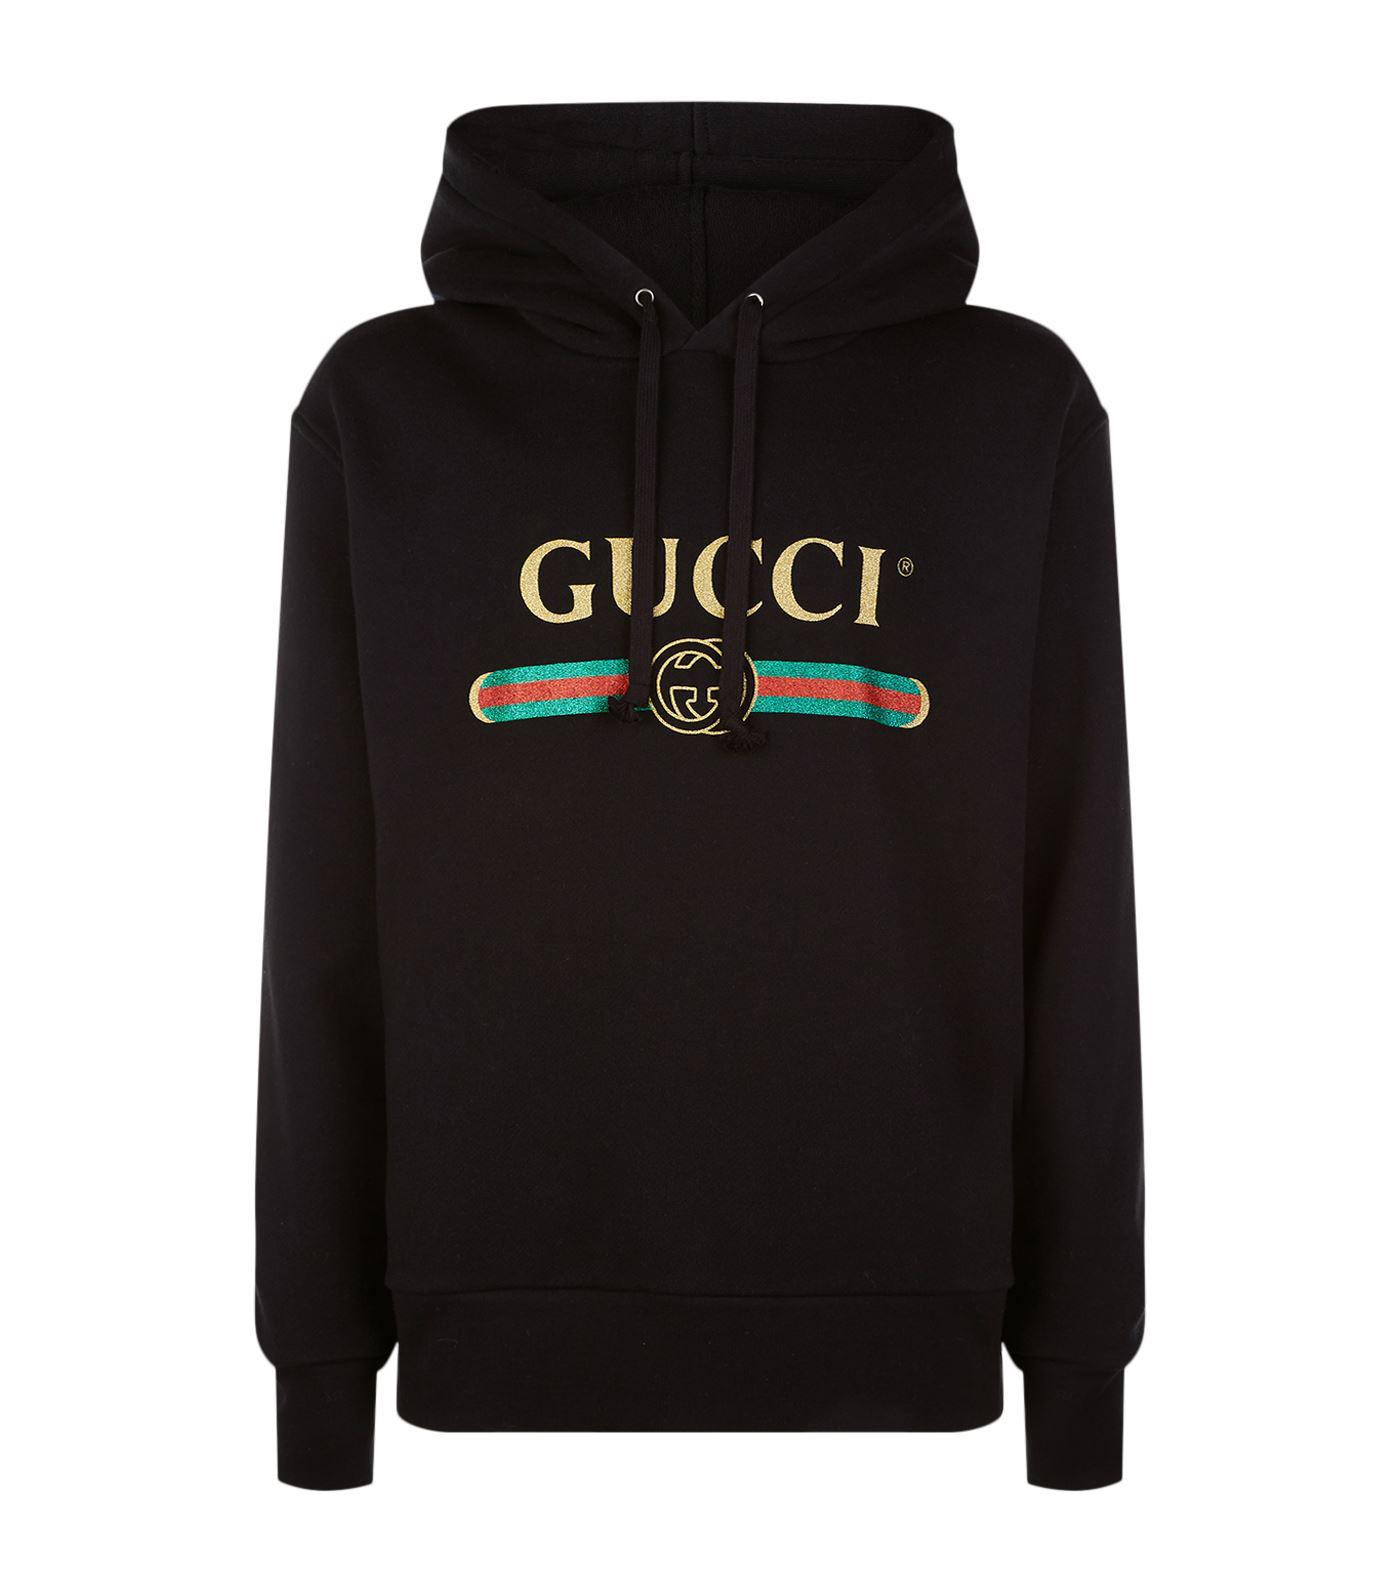 Gucci Cotton Wolf Logo Hoodie in Black for Men - Lyst